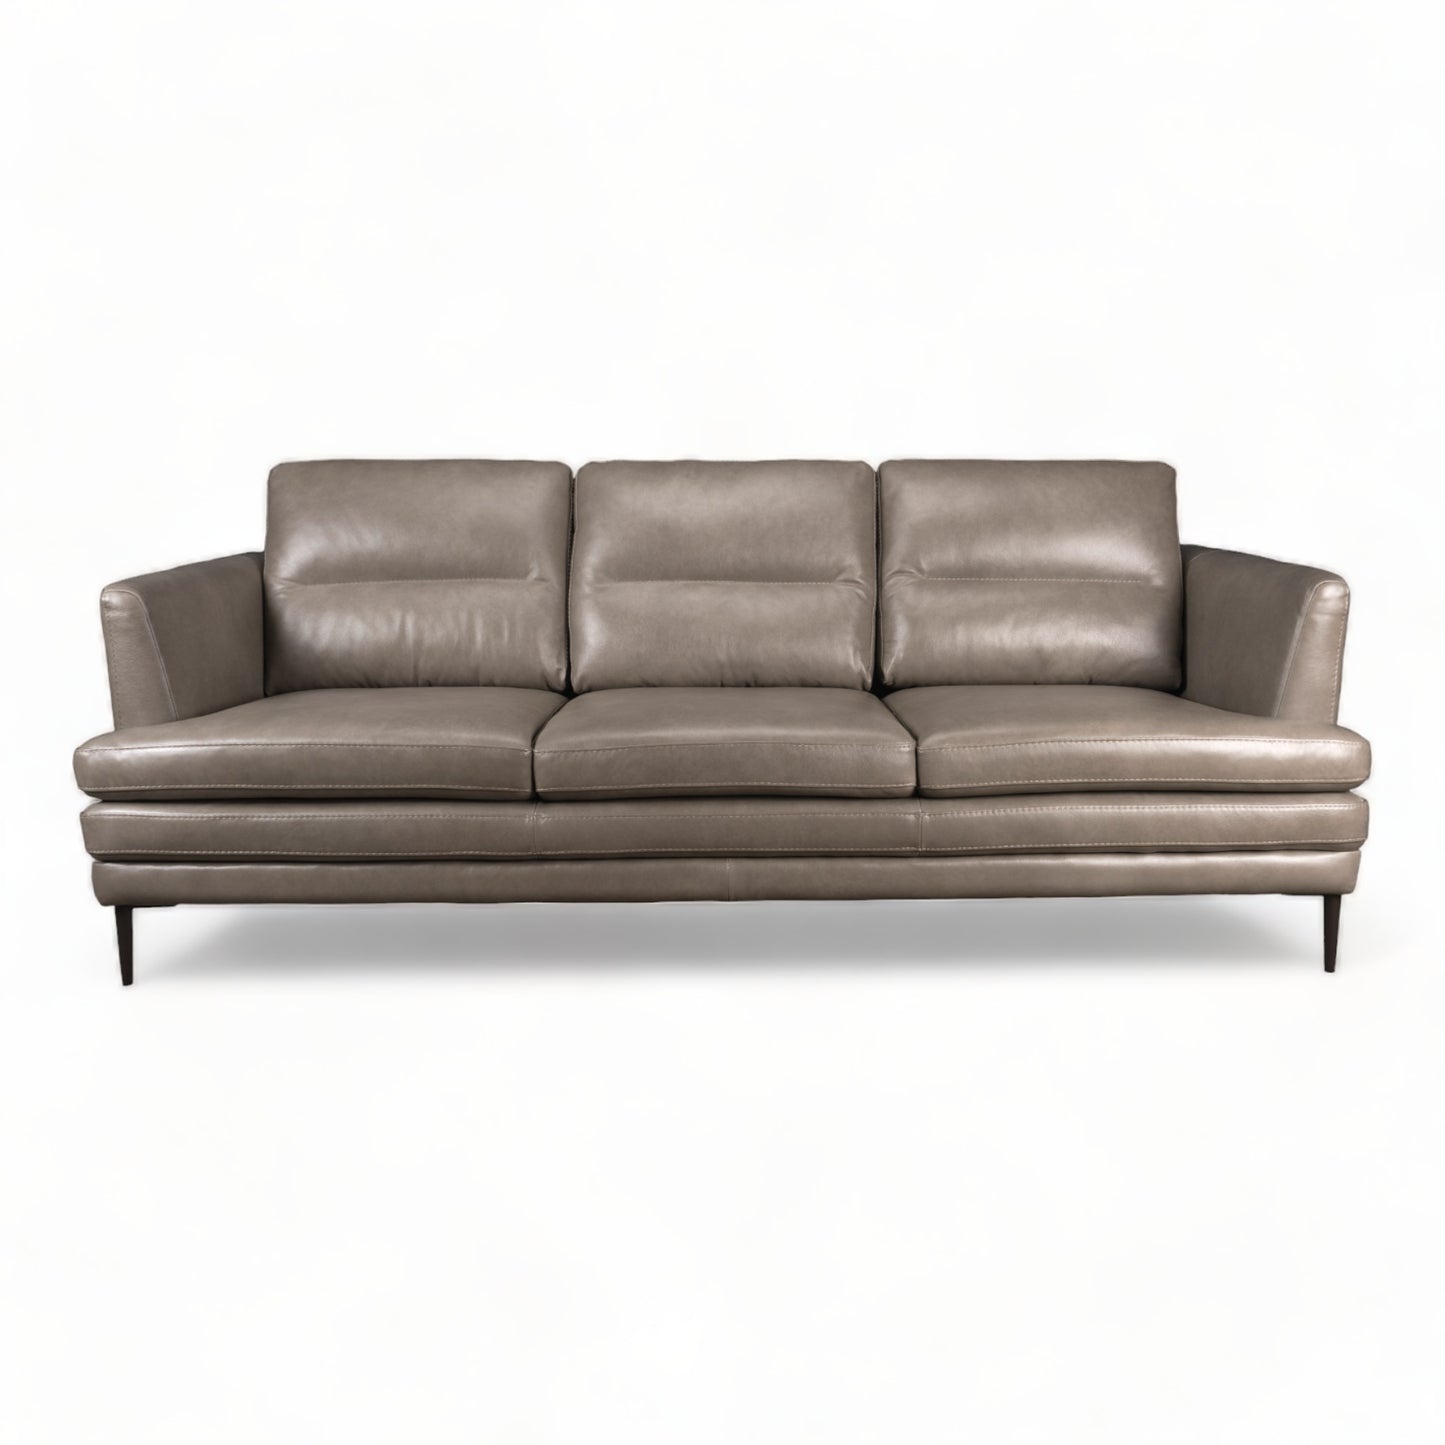 Tuscany 3 Seater (Leather)